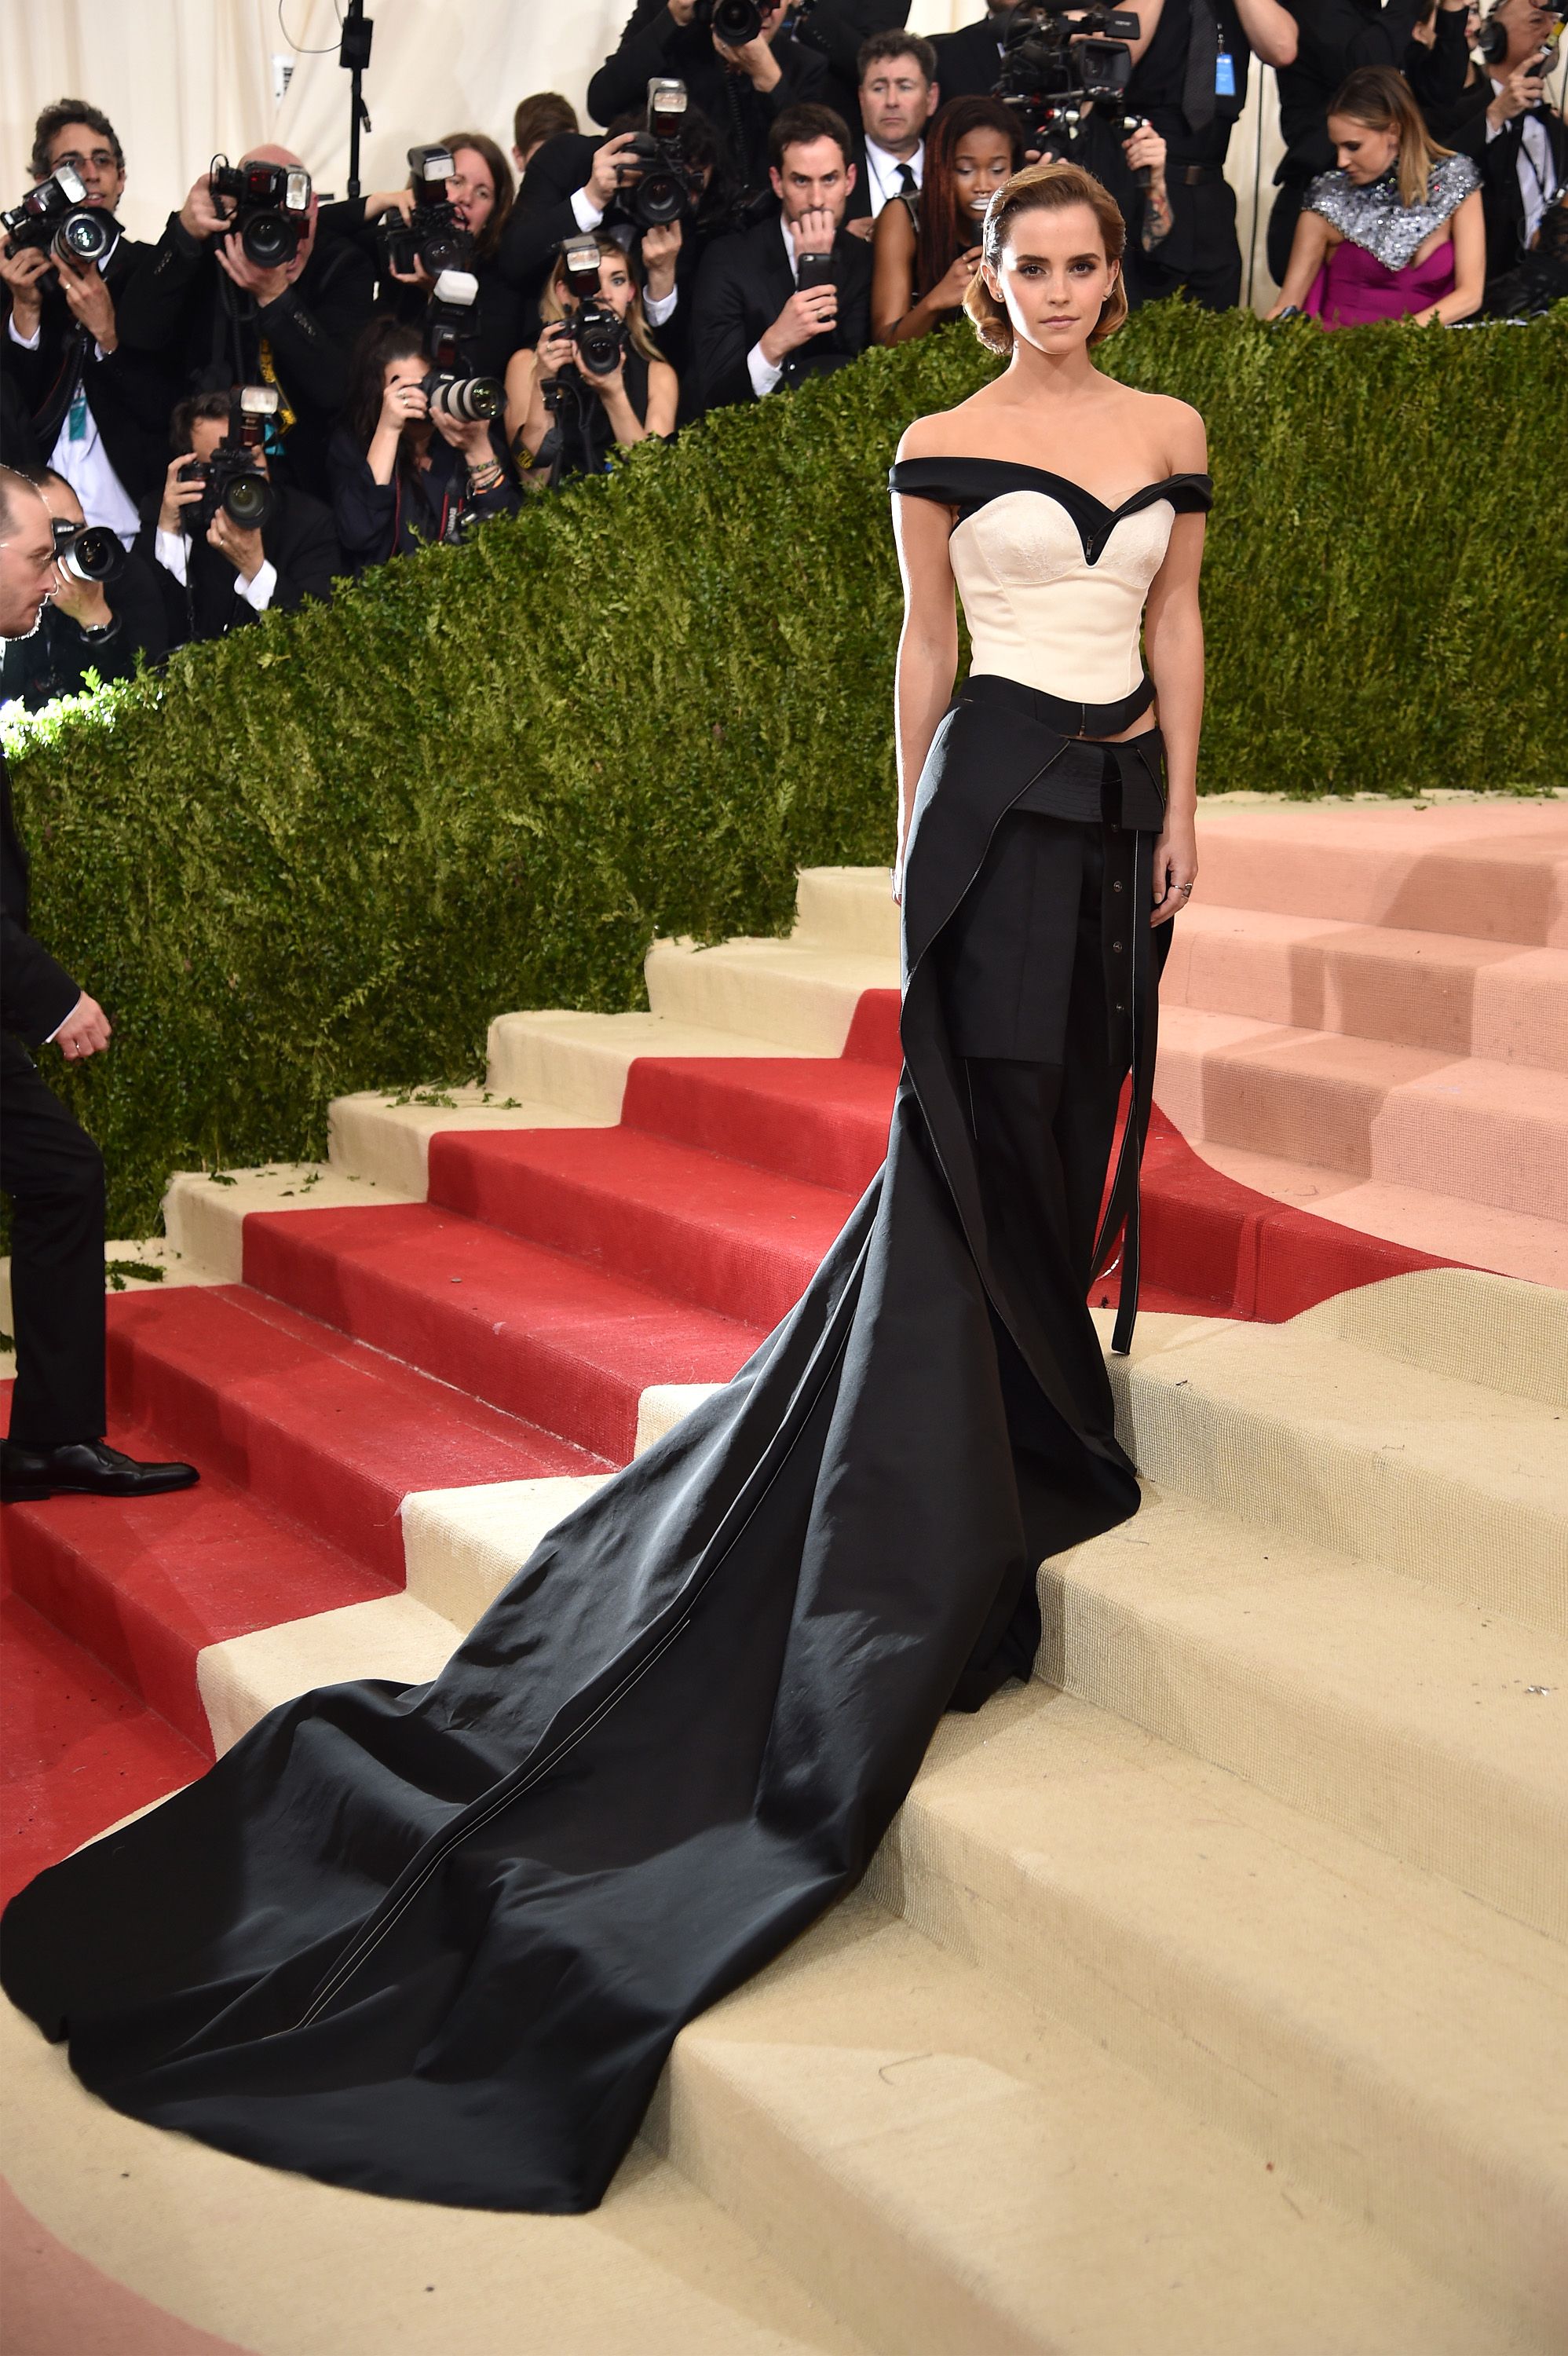 55 of the Best Met Gala Dresses of All Time - Met Gala Best Dressed,  Fashion Photos